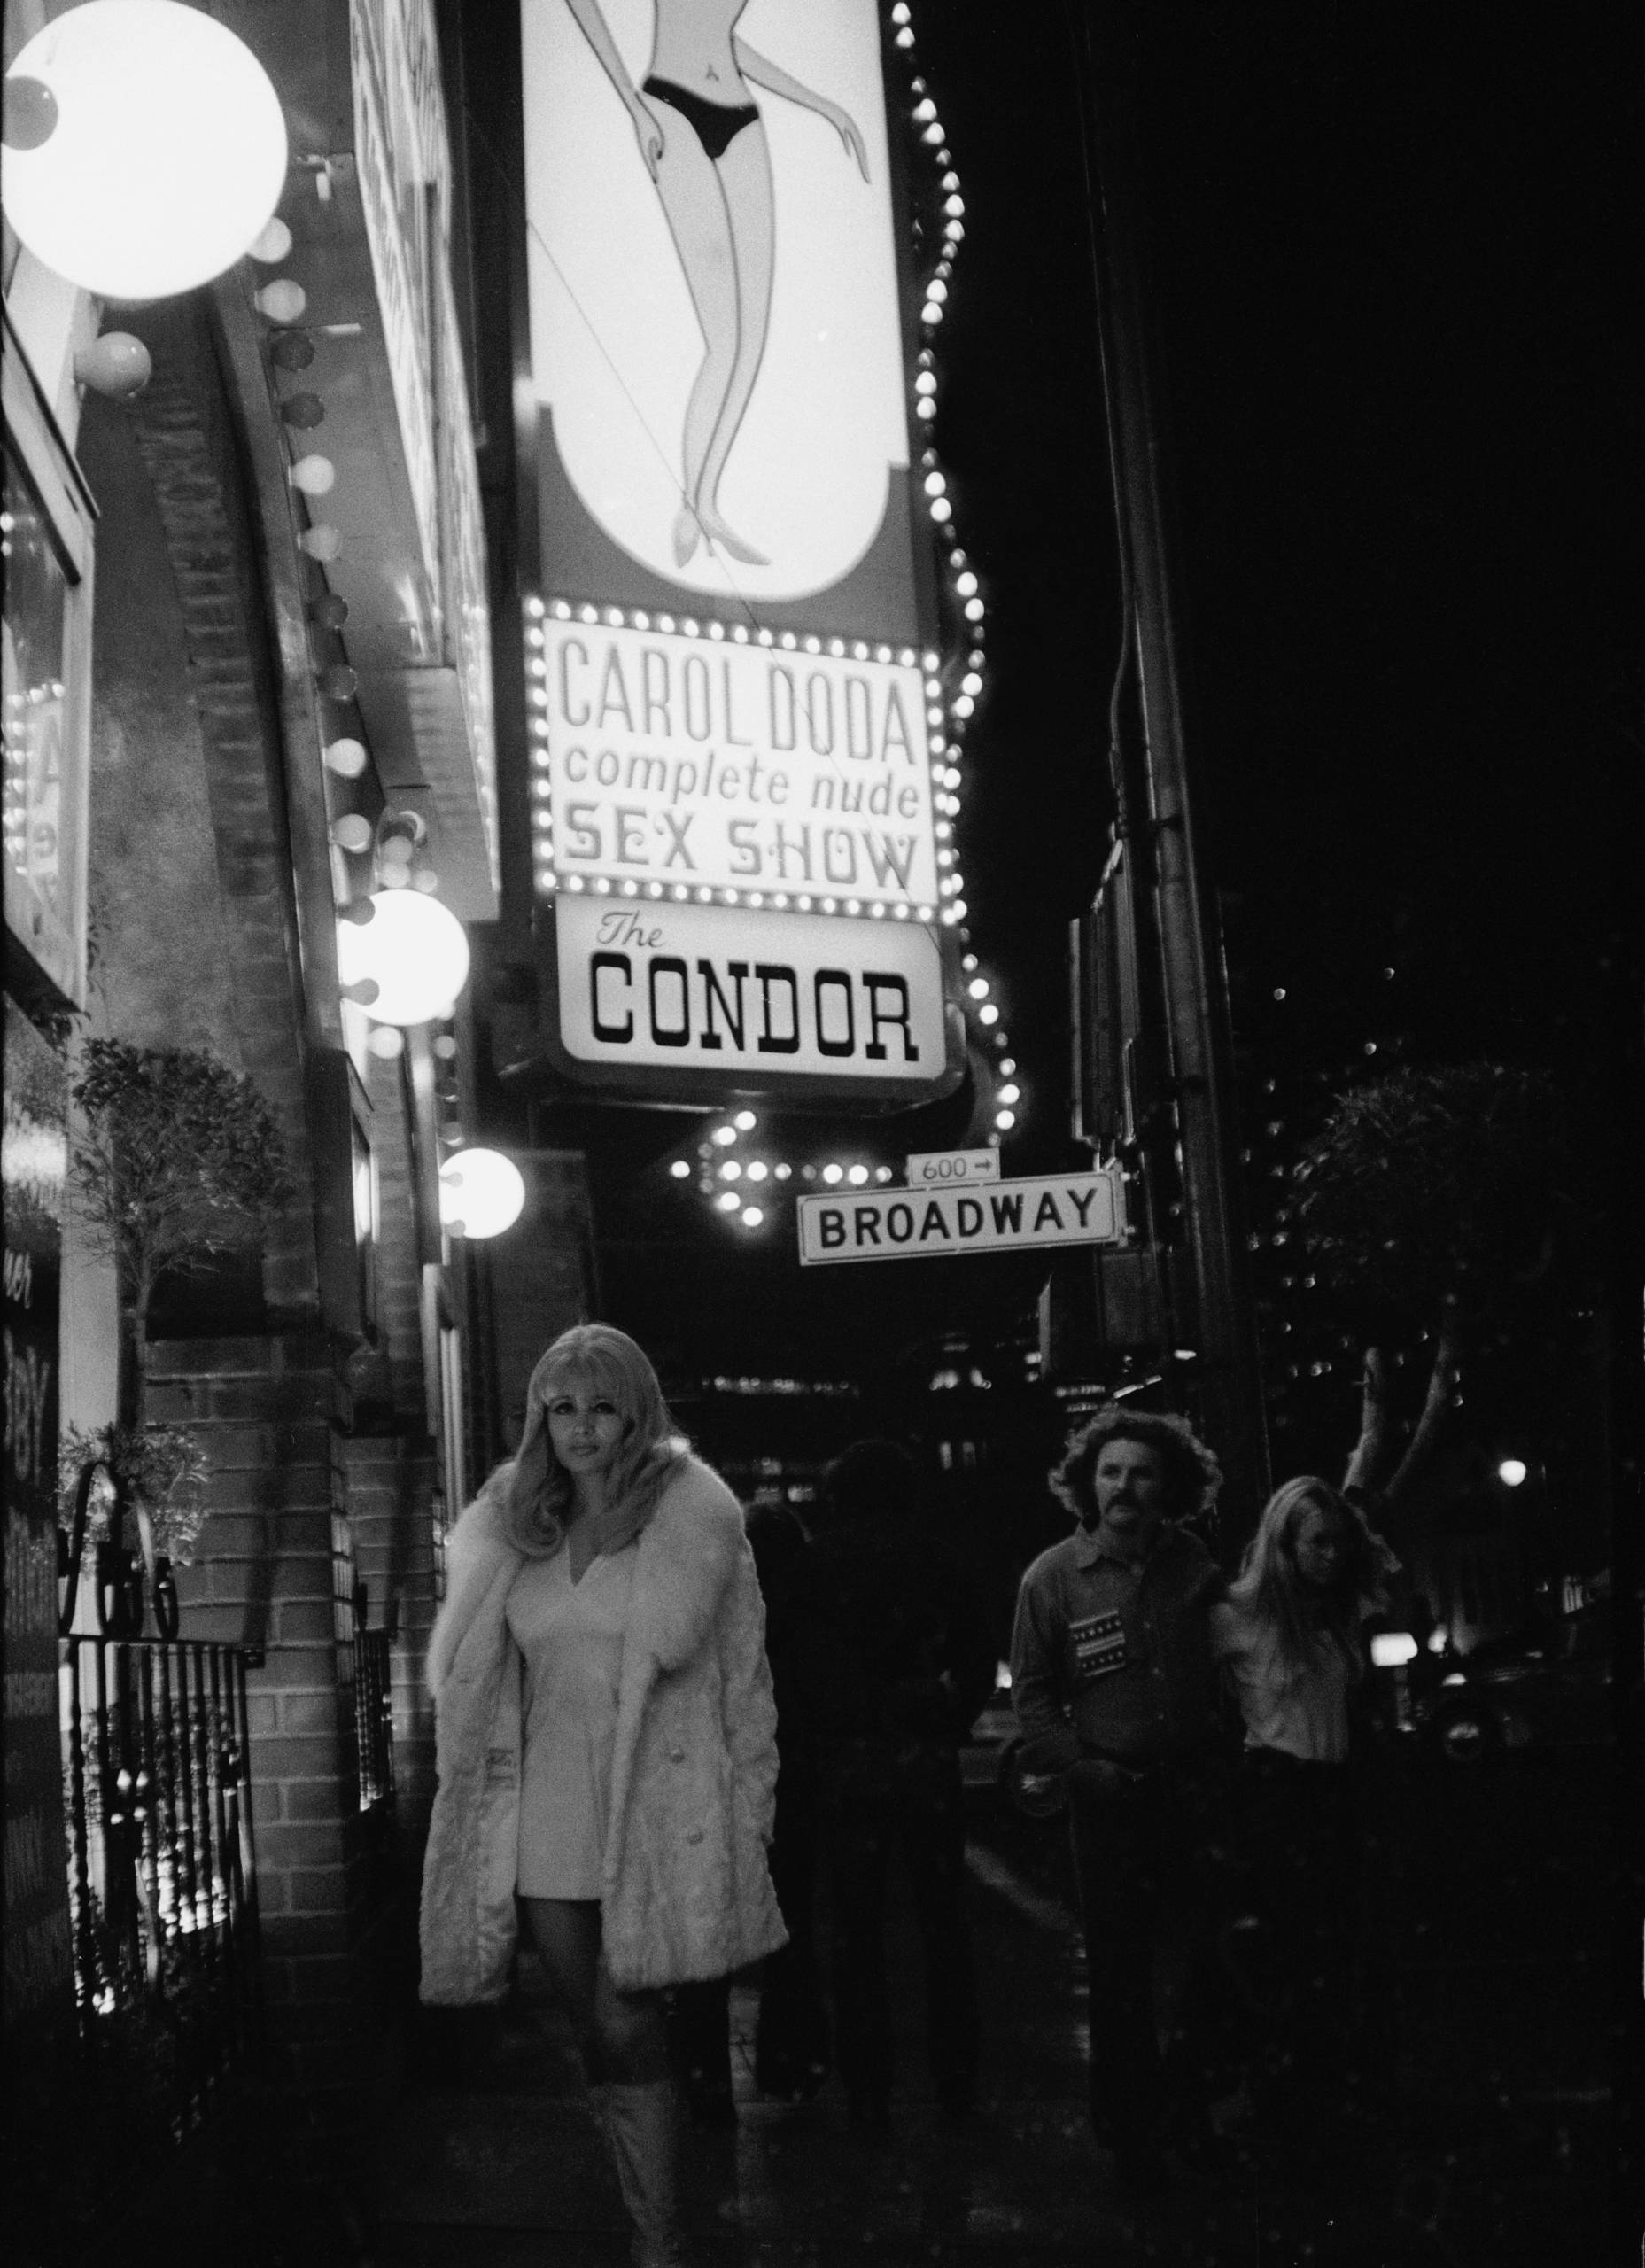 A beautiful blond woman wearing a white coat, miniskirt and boots under a marquee advertising Carol Doda at the Condor.